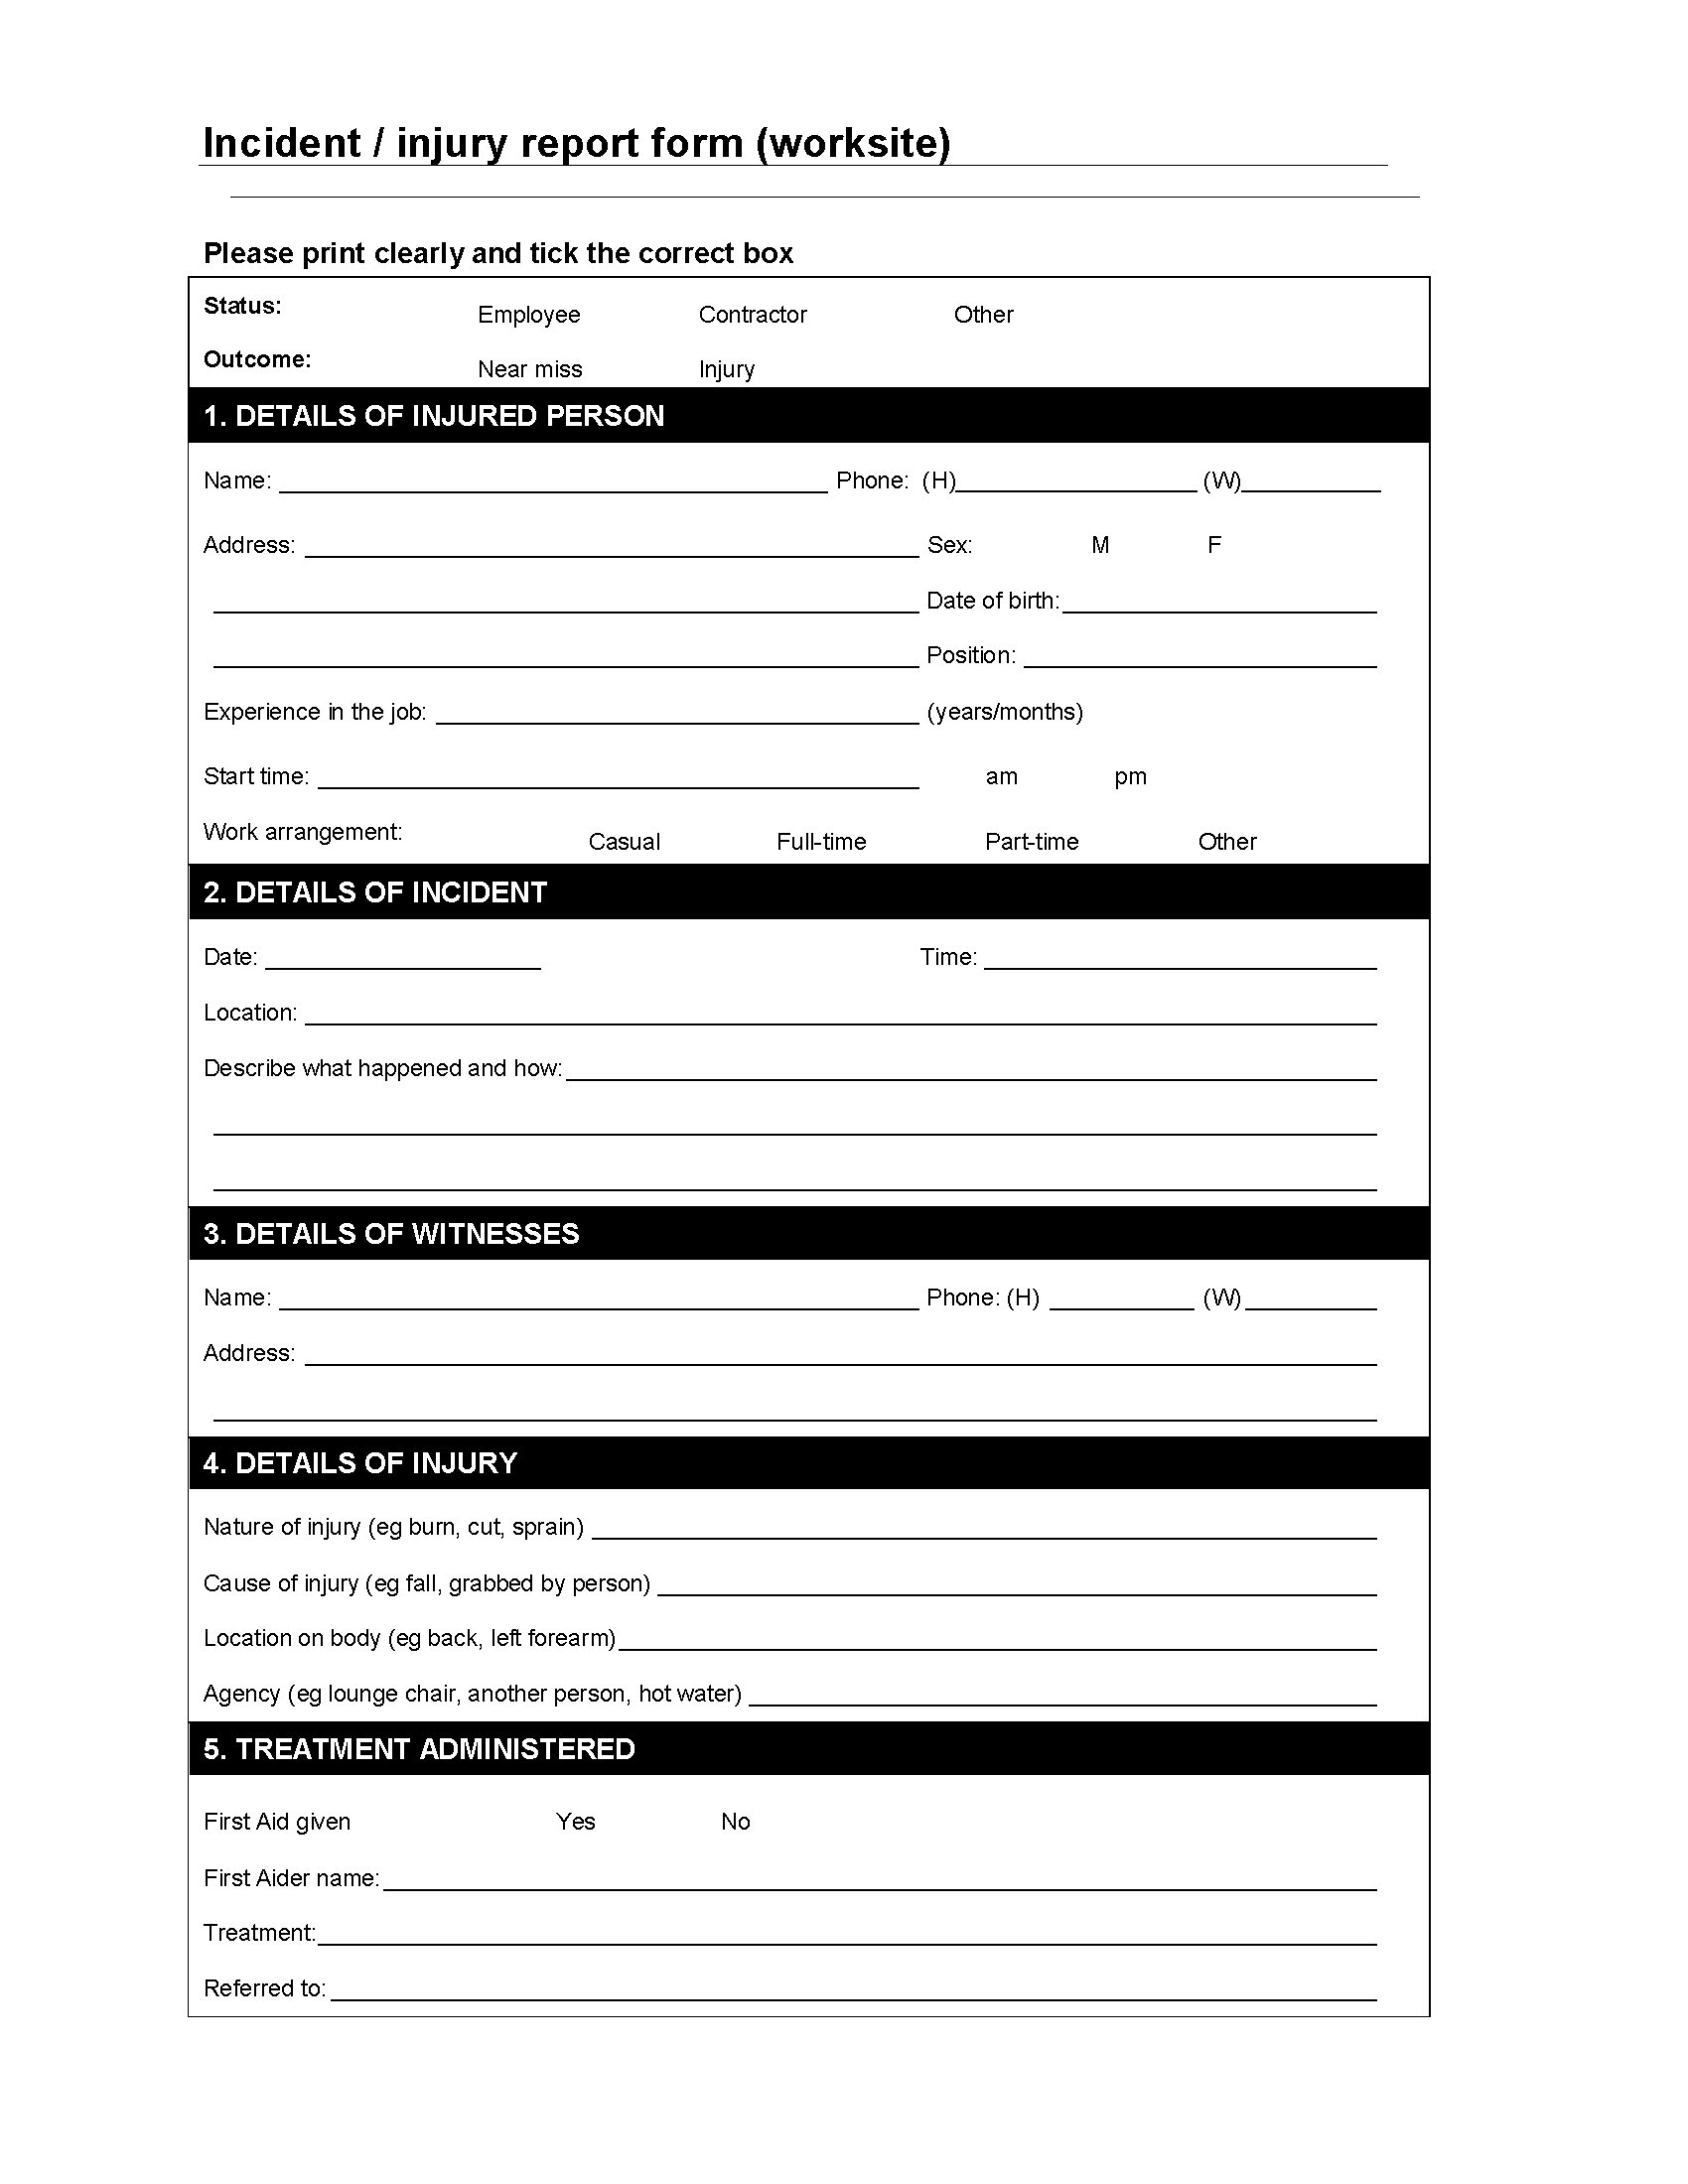 Worksite Incident / Injury Report Form  Legal Forms and Business  Pertaining To Hazard Incident Report Form Template